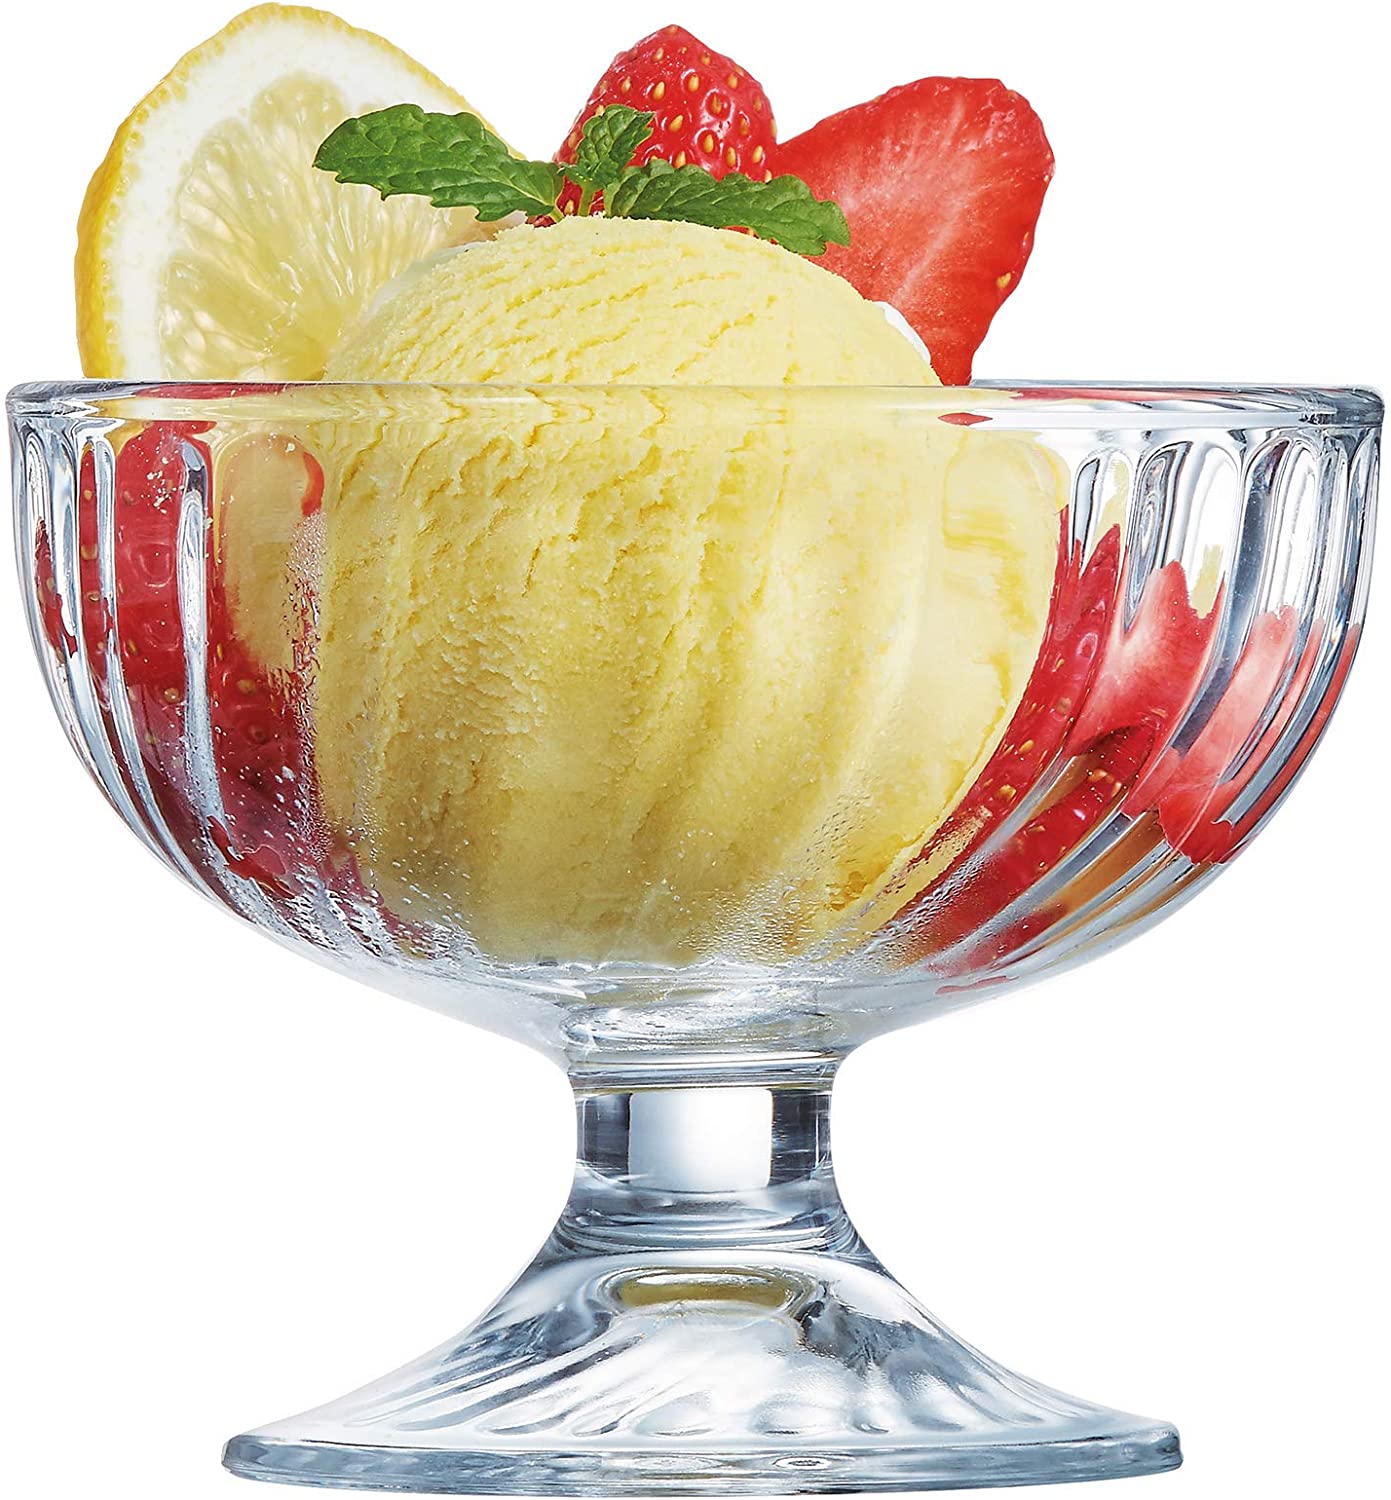 Arcoroc Arco Rock Ice & Sunday coupe sorbet Large (six pieces) ice dish 43121 (Japan import / The package and the manual are written in Japanese)